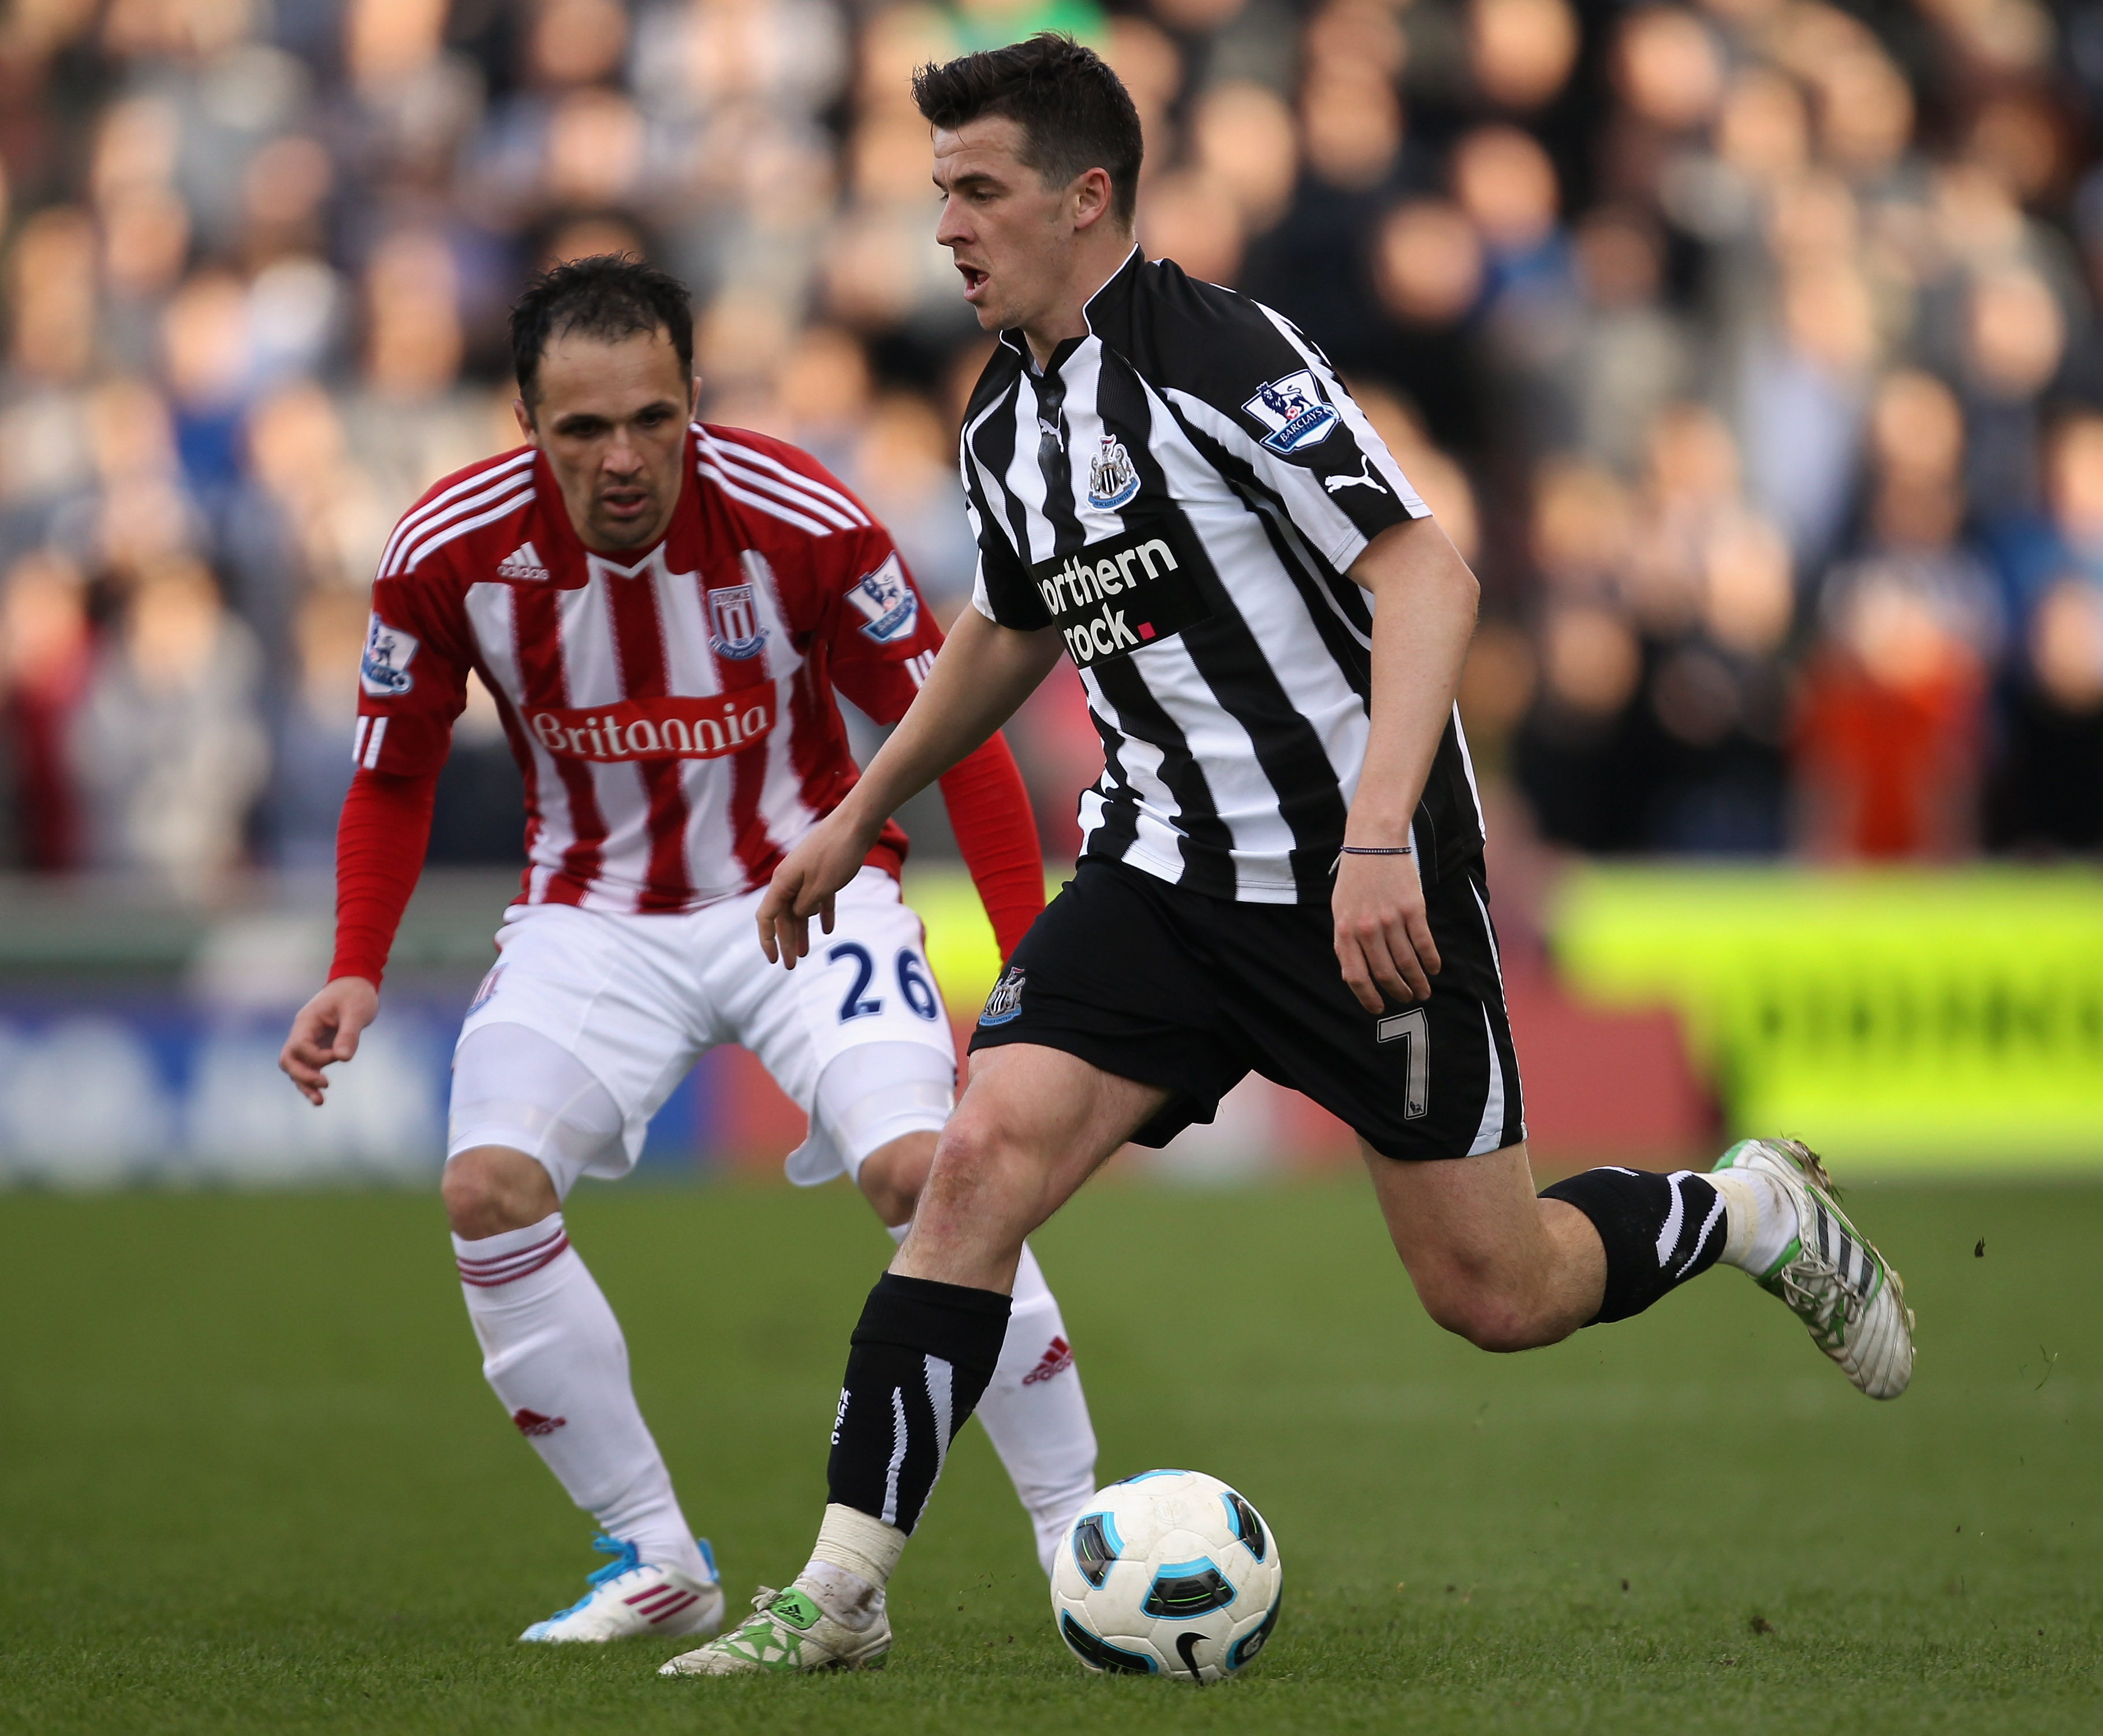 STOKE ON TRENT, ENGLAND - MARCH 19:  Joey Barton of Newcastle United avoids Mathew Etherington of Stoke City during the Barclays Premier League match between Stoke City and Newcastle United at Britannia Stadium on March 19, 2011 in Stoke on Trent, England